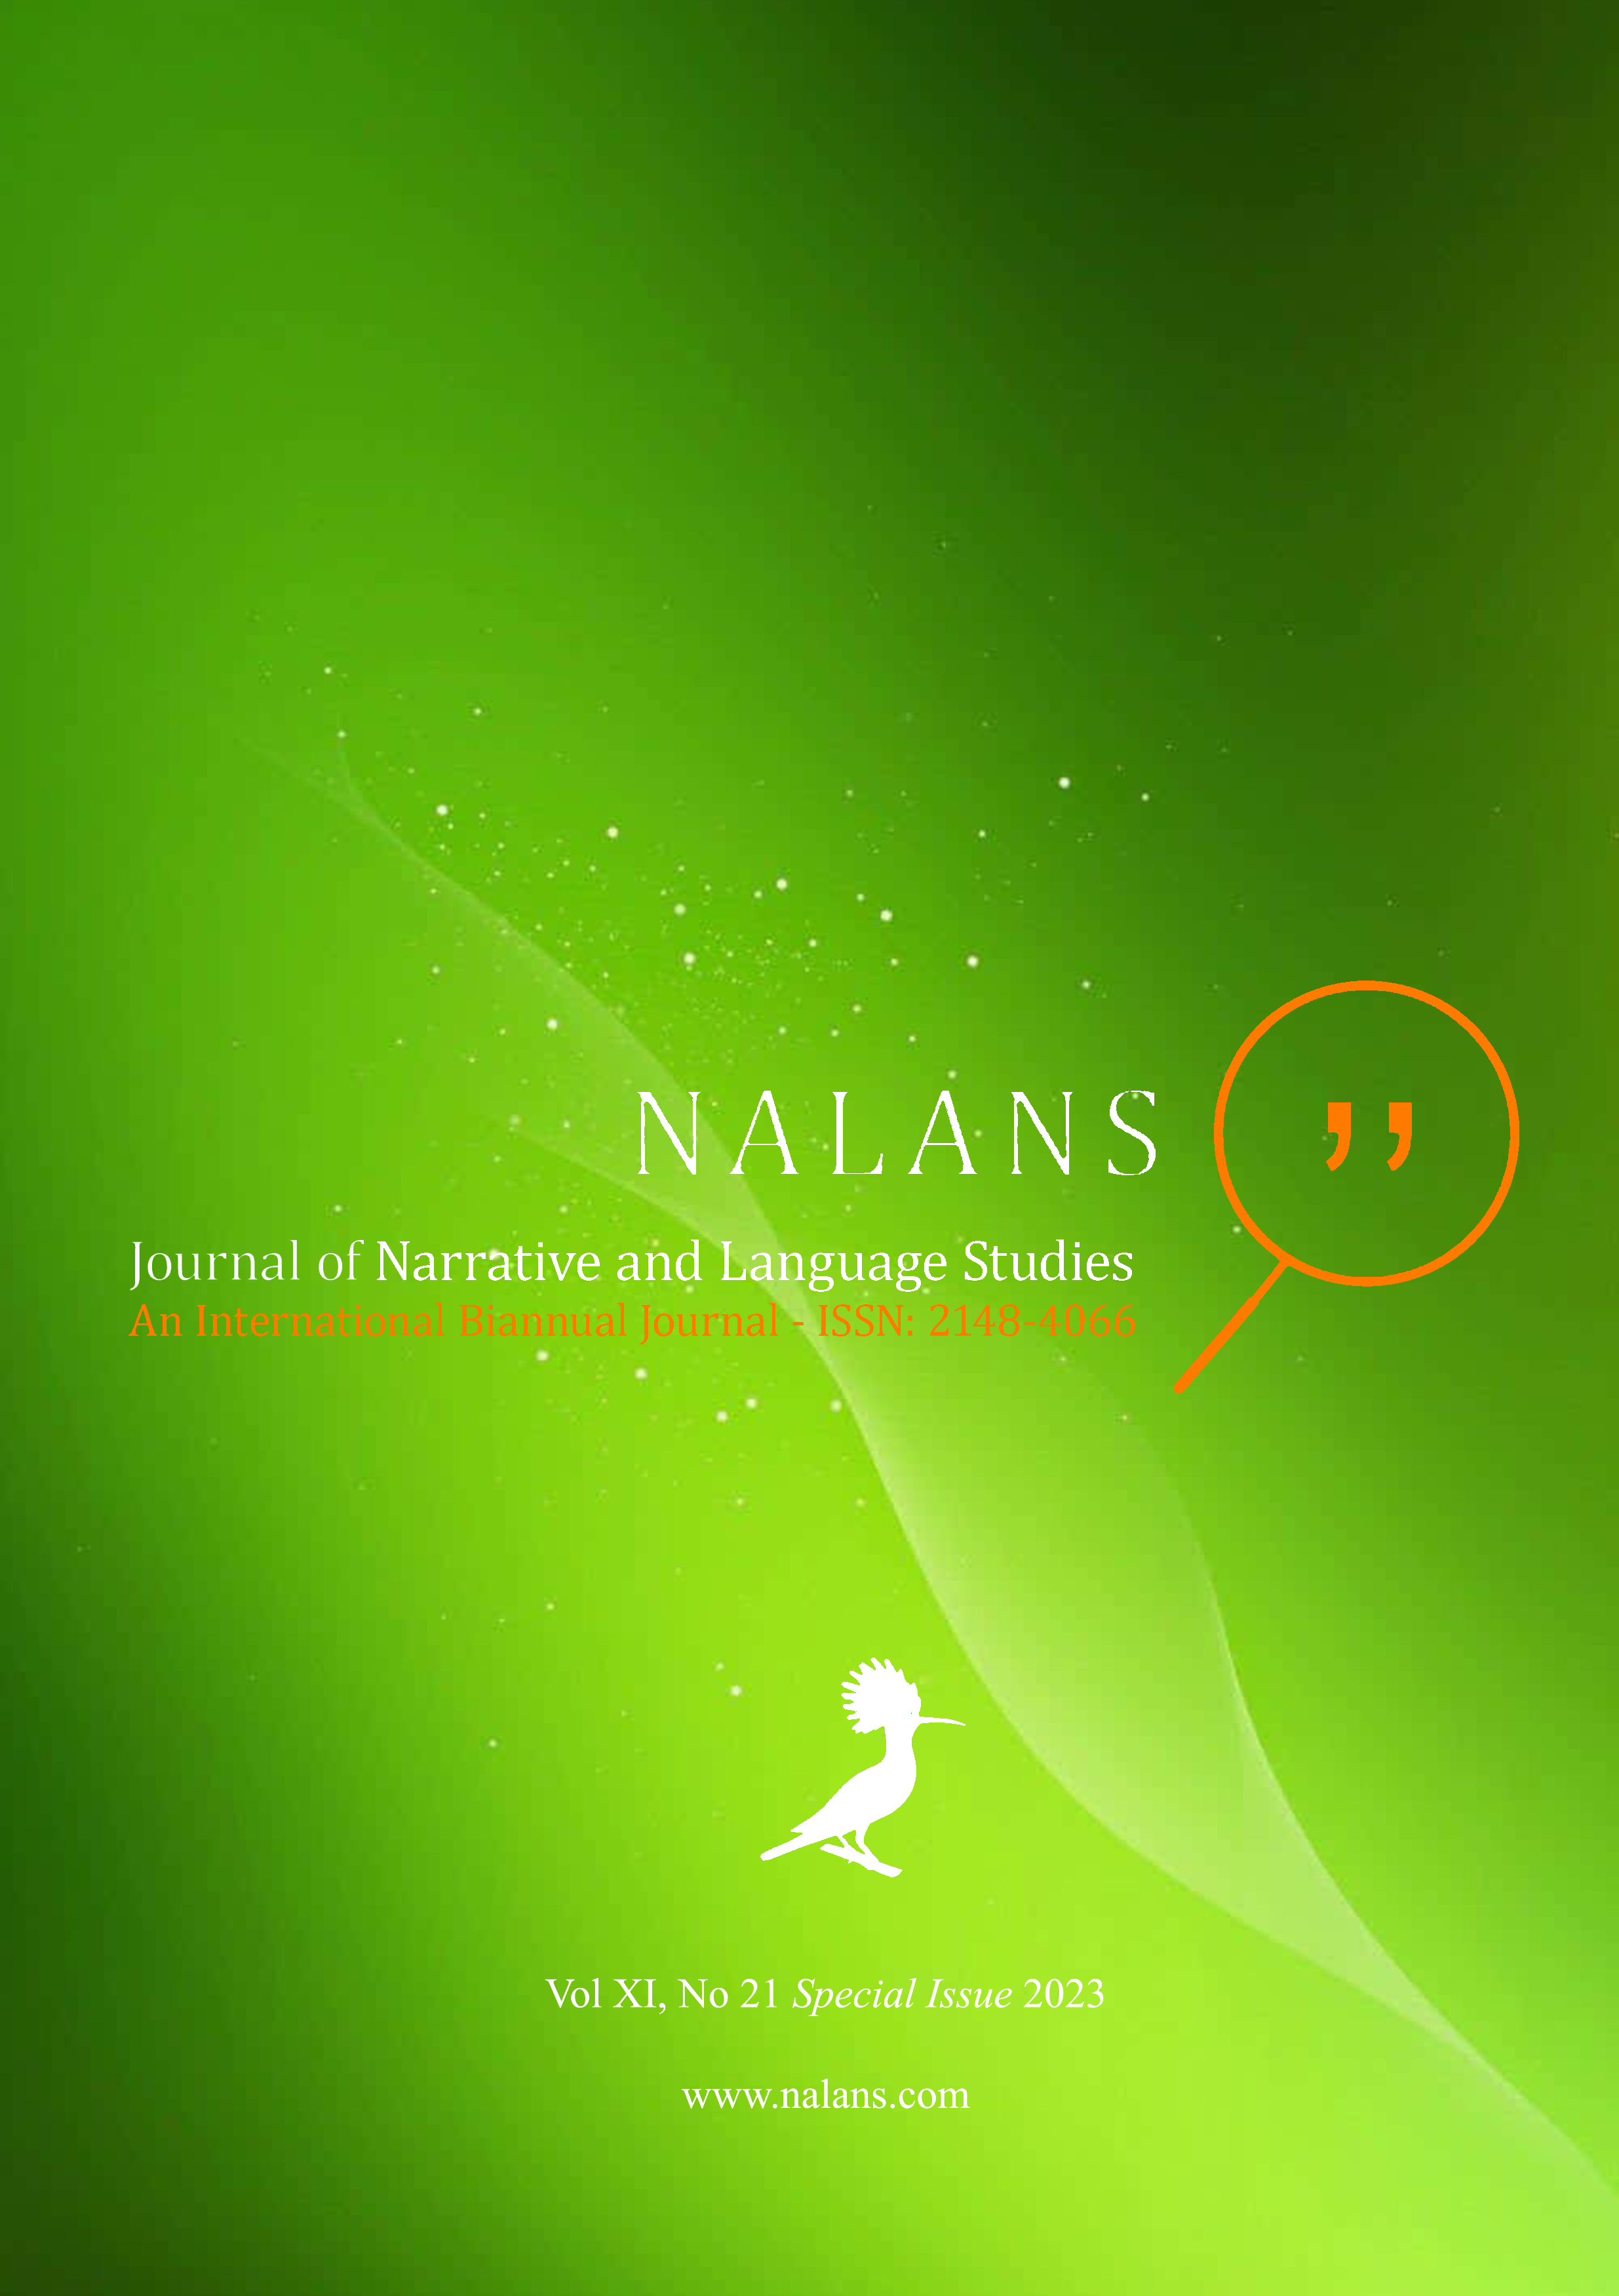 					View Vol. 11 No. 21 (2023): NALANS Special Issue: Capitalism, Anthropocene, and literature of the Global South
				